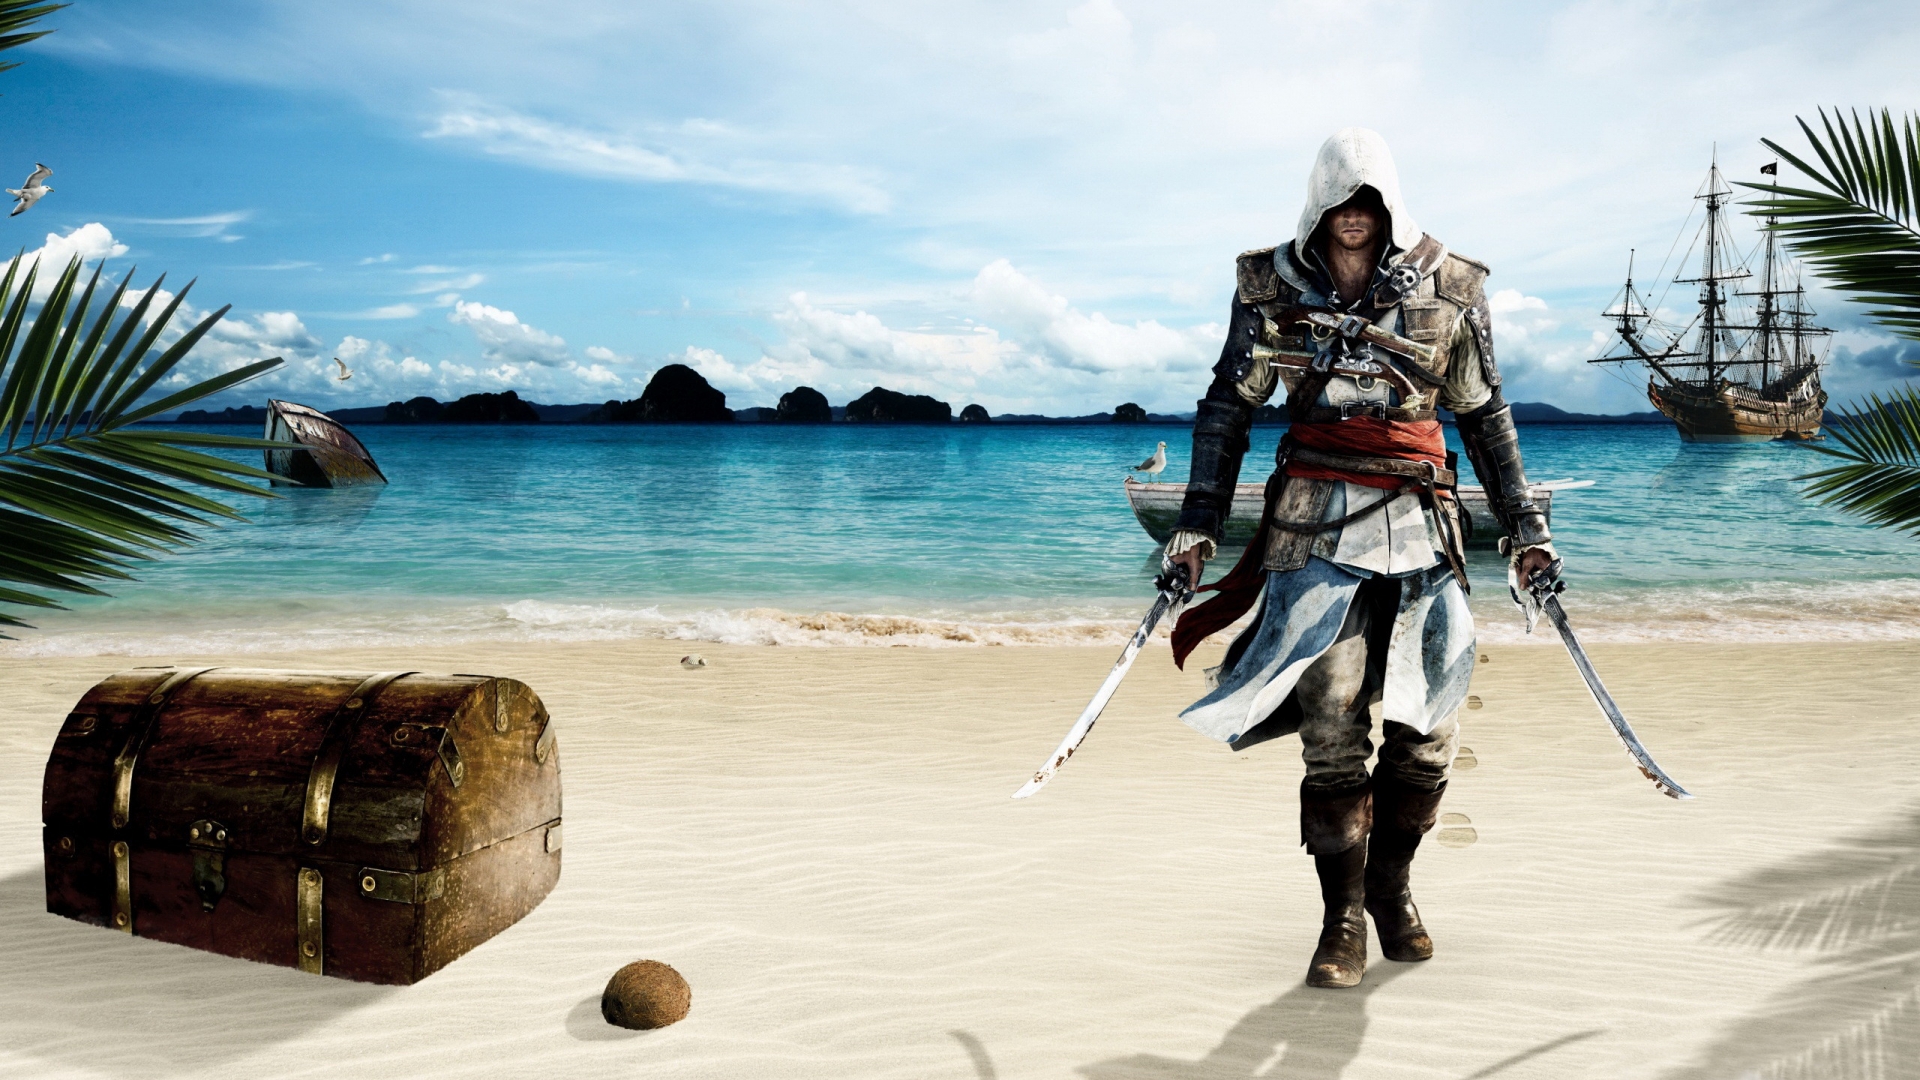 Assassin Creed 4 Beach for 1920 x 1080 HDTV 1080p resolution